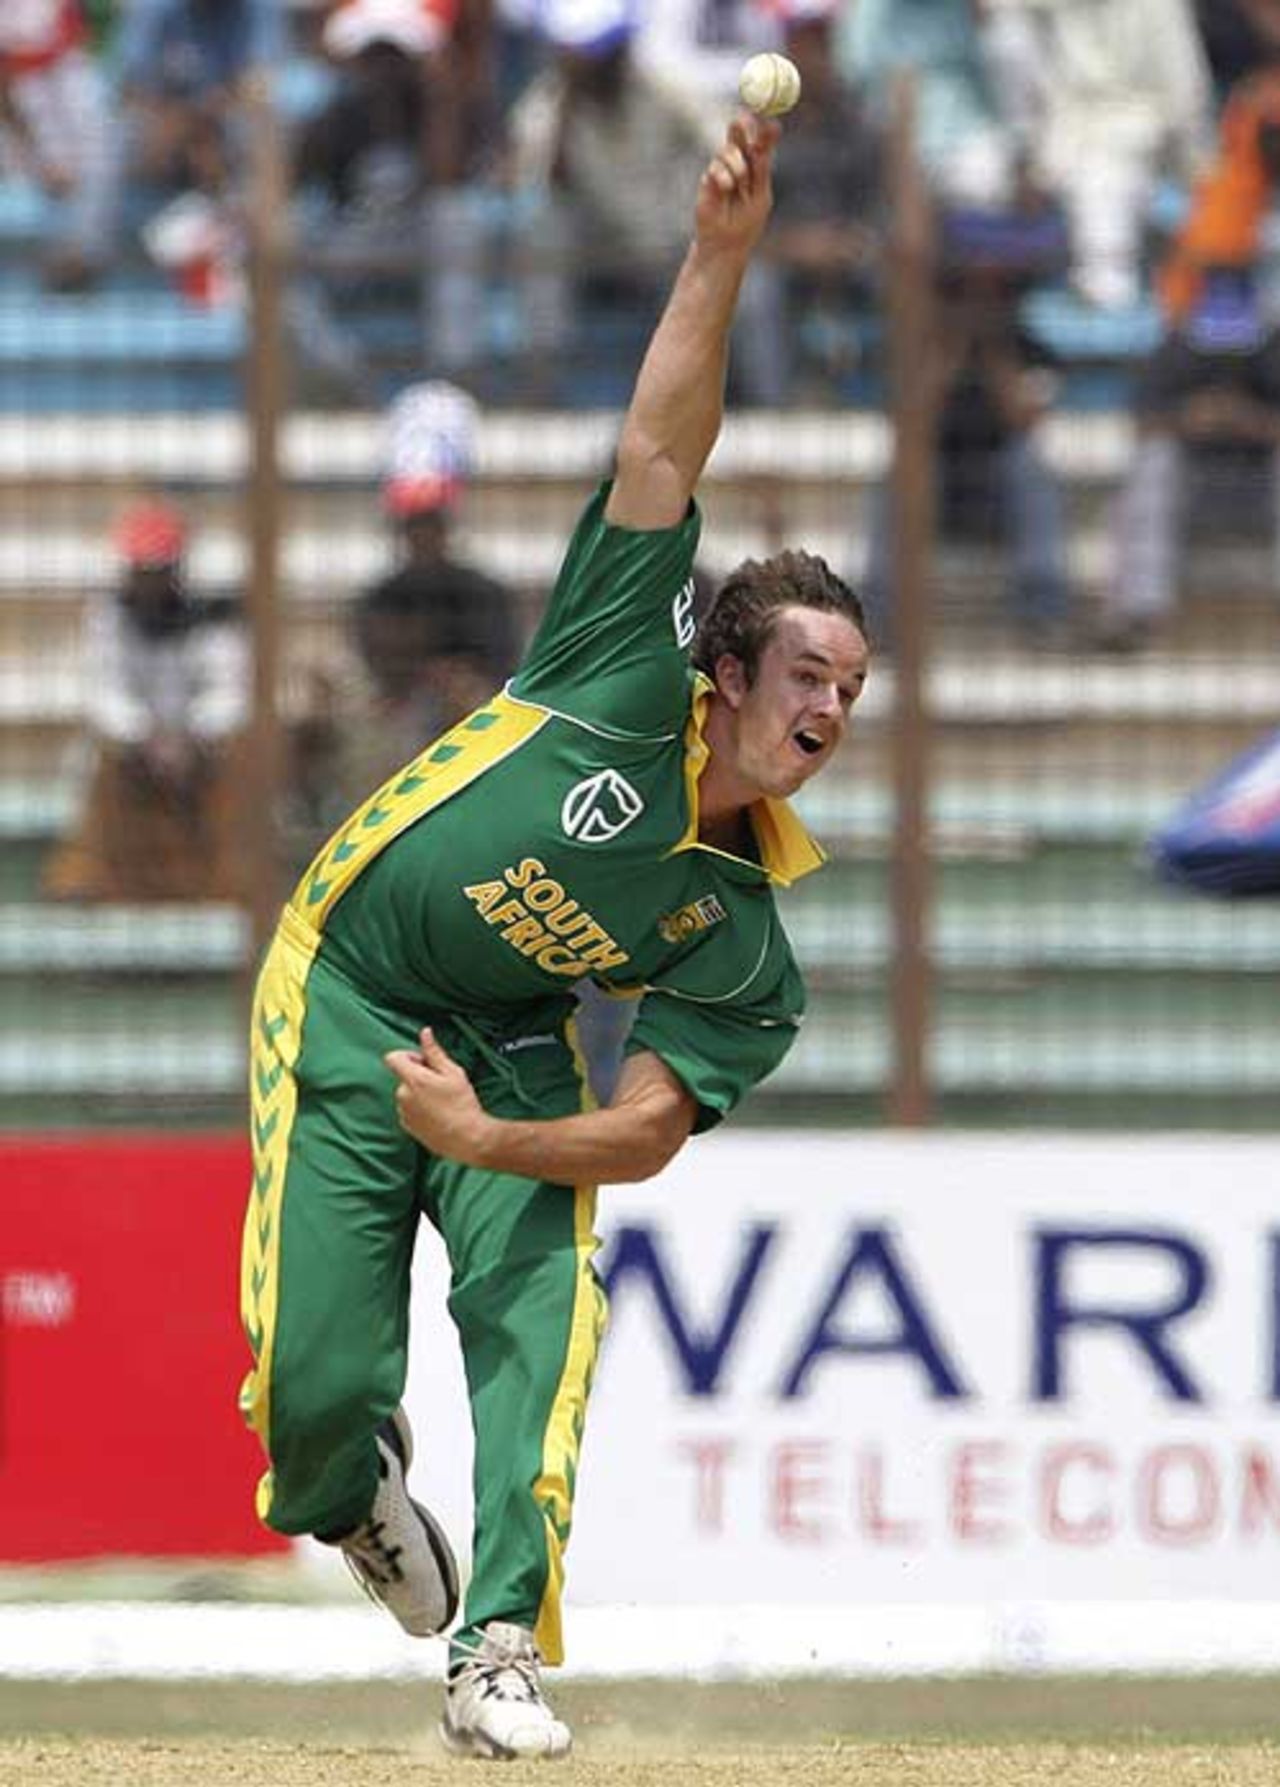 Albie Morkel picked up 2 for 30, Bangladesh v South Africa, 1st ODI, Chittagong, March 9, 2008